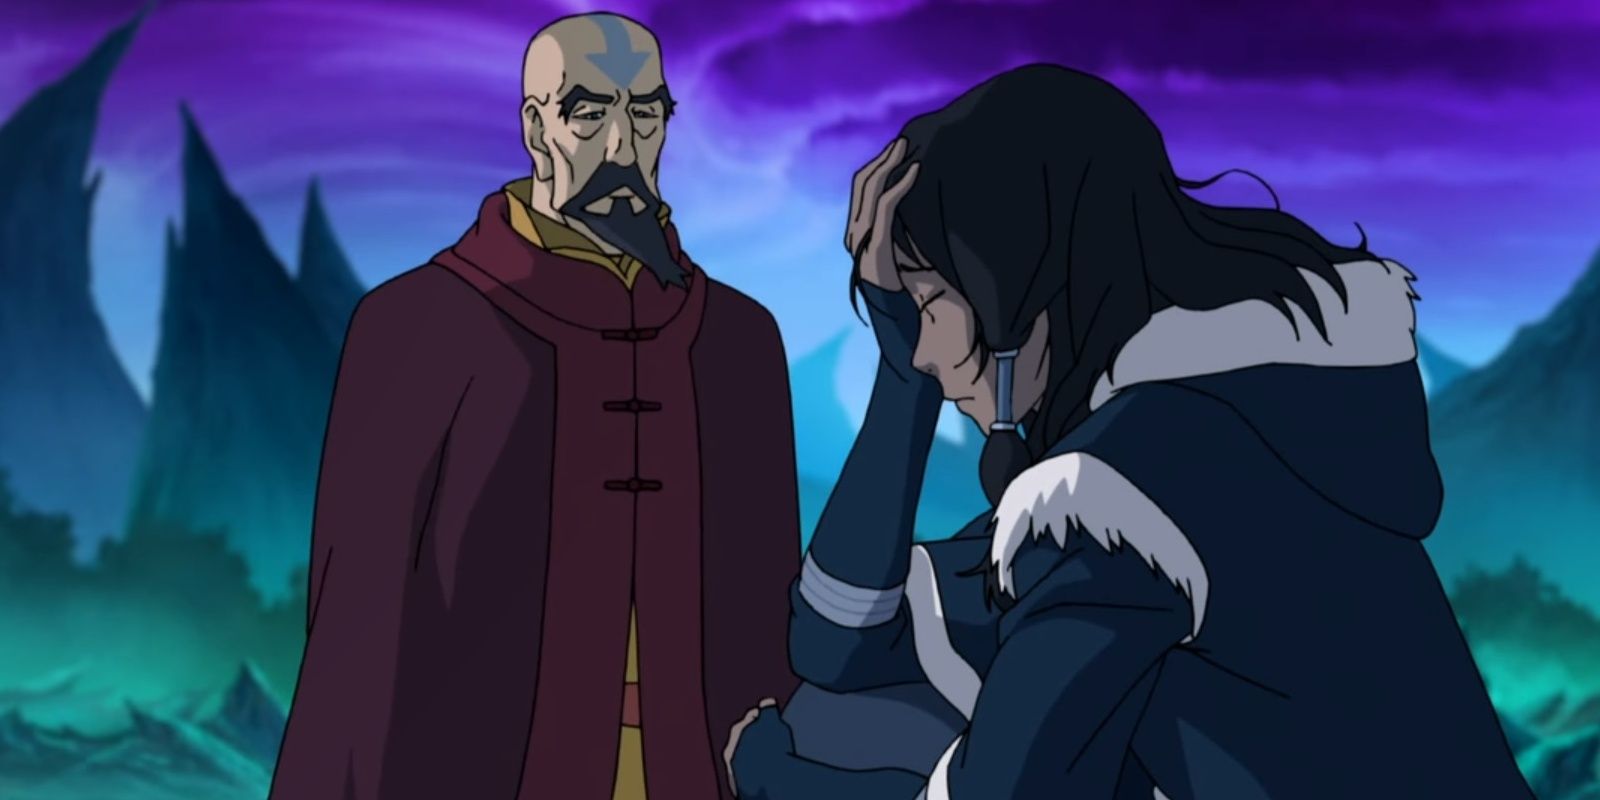 Korra Needed This Lesson In Order To Reach Her Full Potential